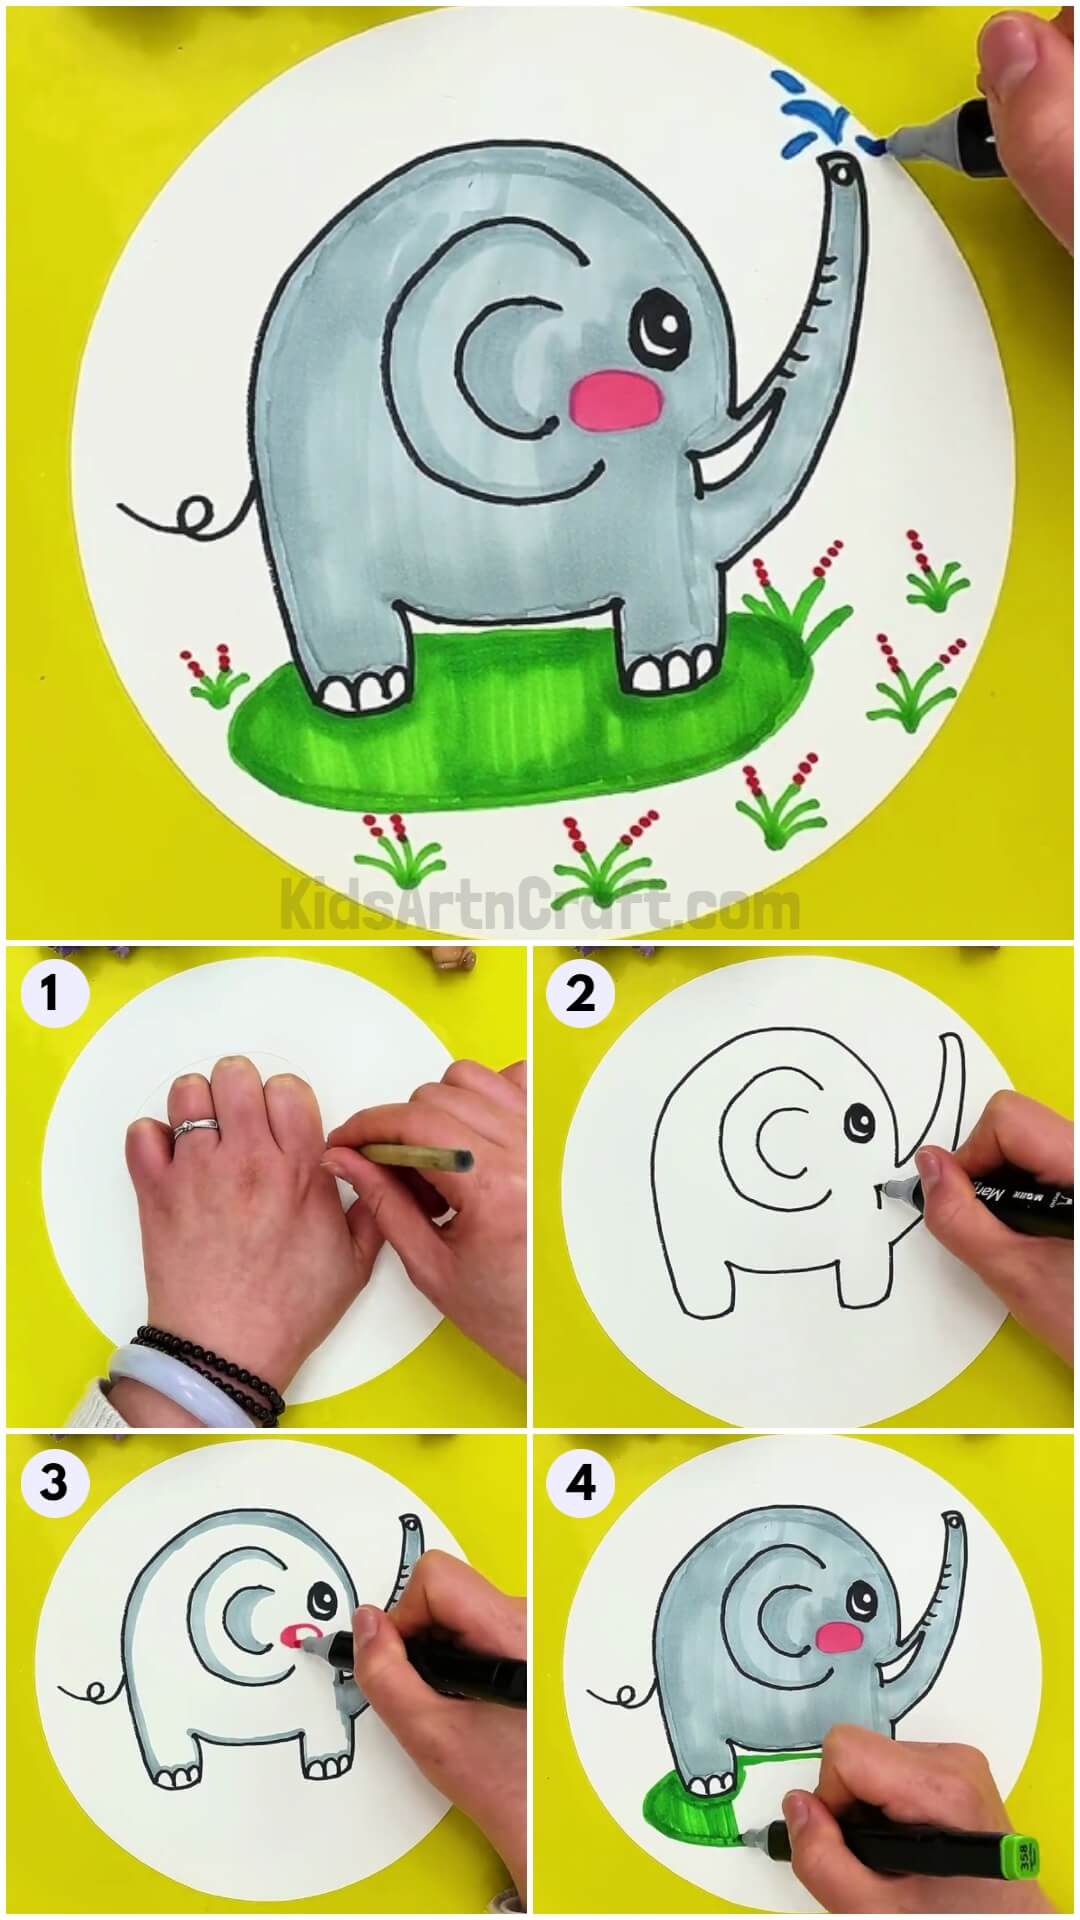  Adorable Elephant Hand Drawing Step by Step Tutorial